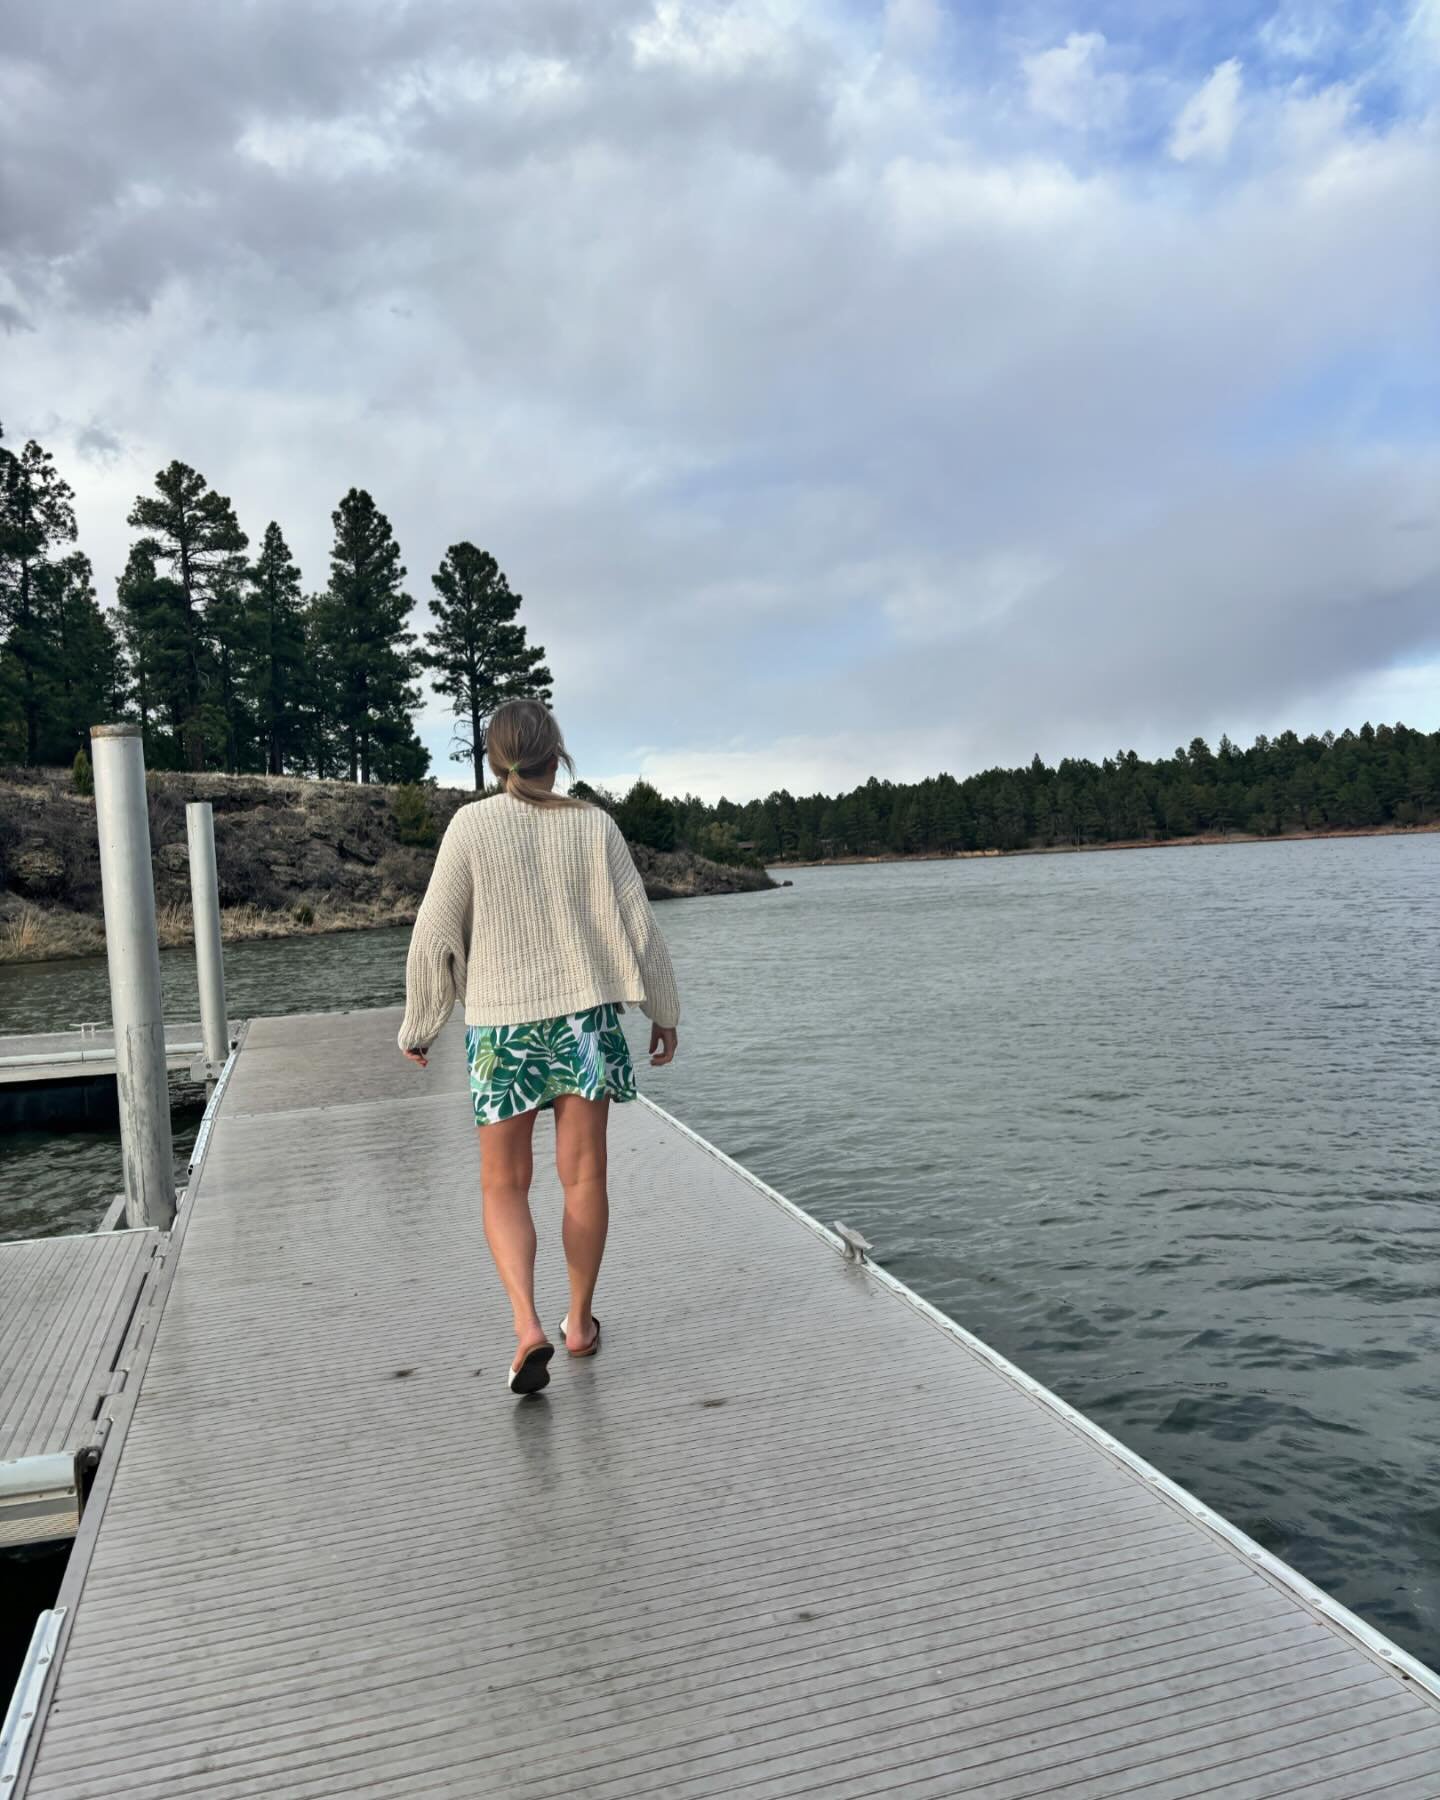 There&rsquo;s a balance in creating and sharing, one that is constantly ebbing and flowing in my life. More at this week&rsquo;s blog- www.chellesummer.com

#seekingbalance #balance #creativelife #chellesummer #chellesummerstyle #mystyle #mylife #ari